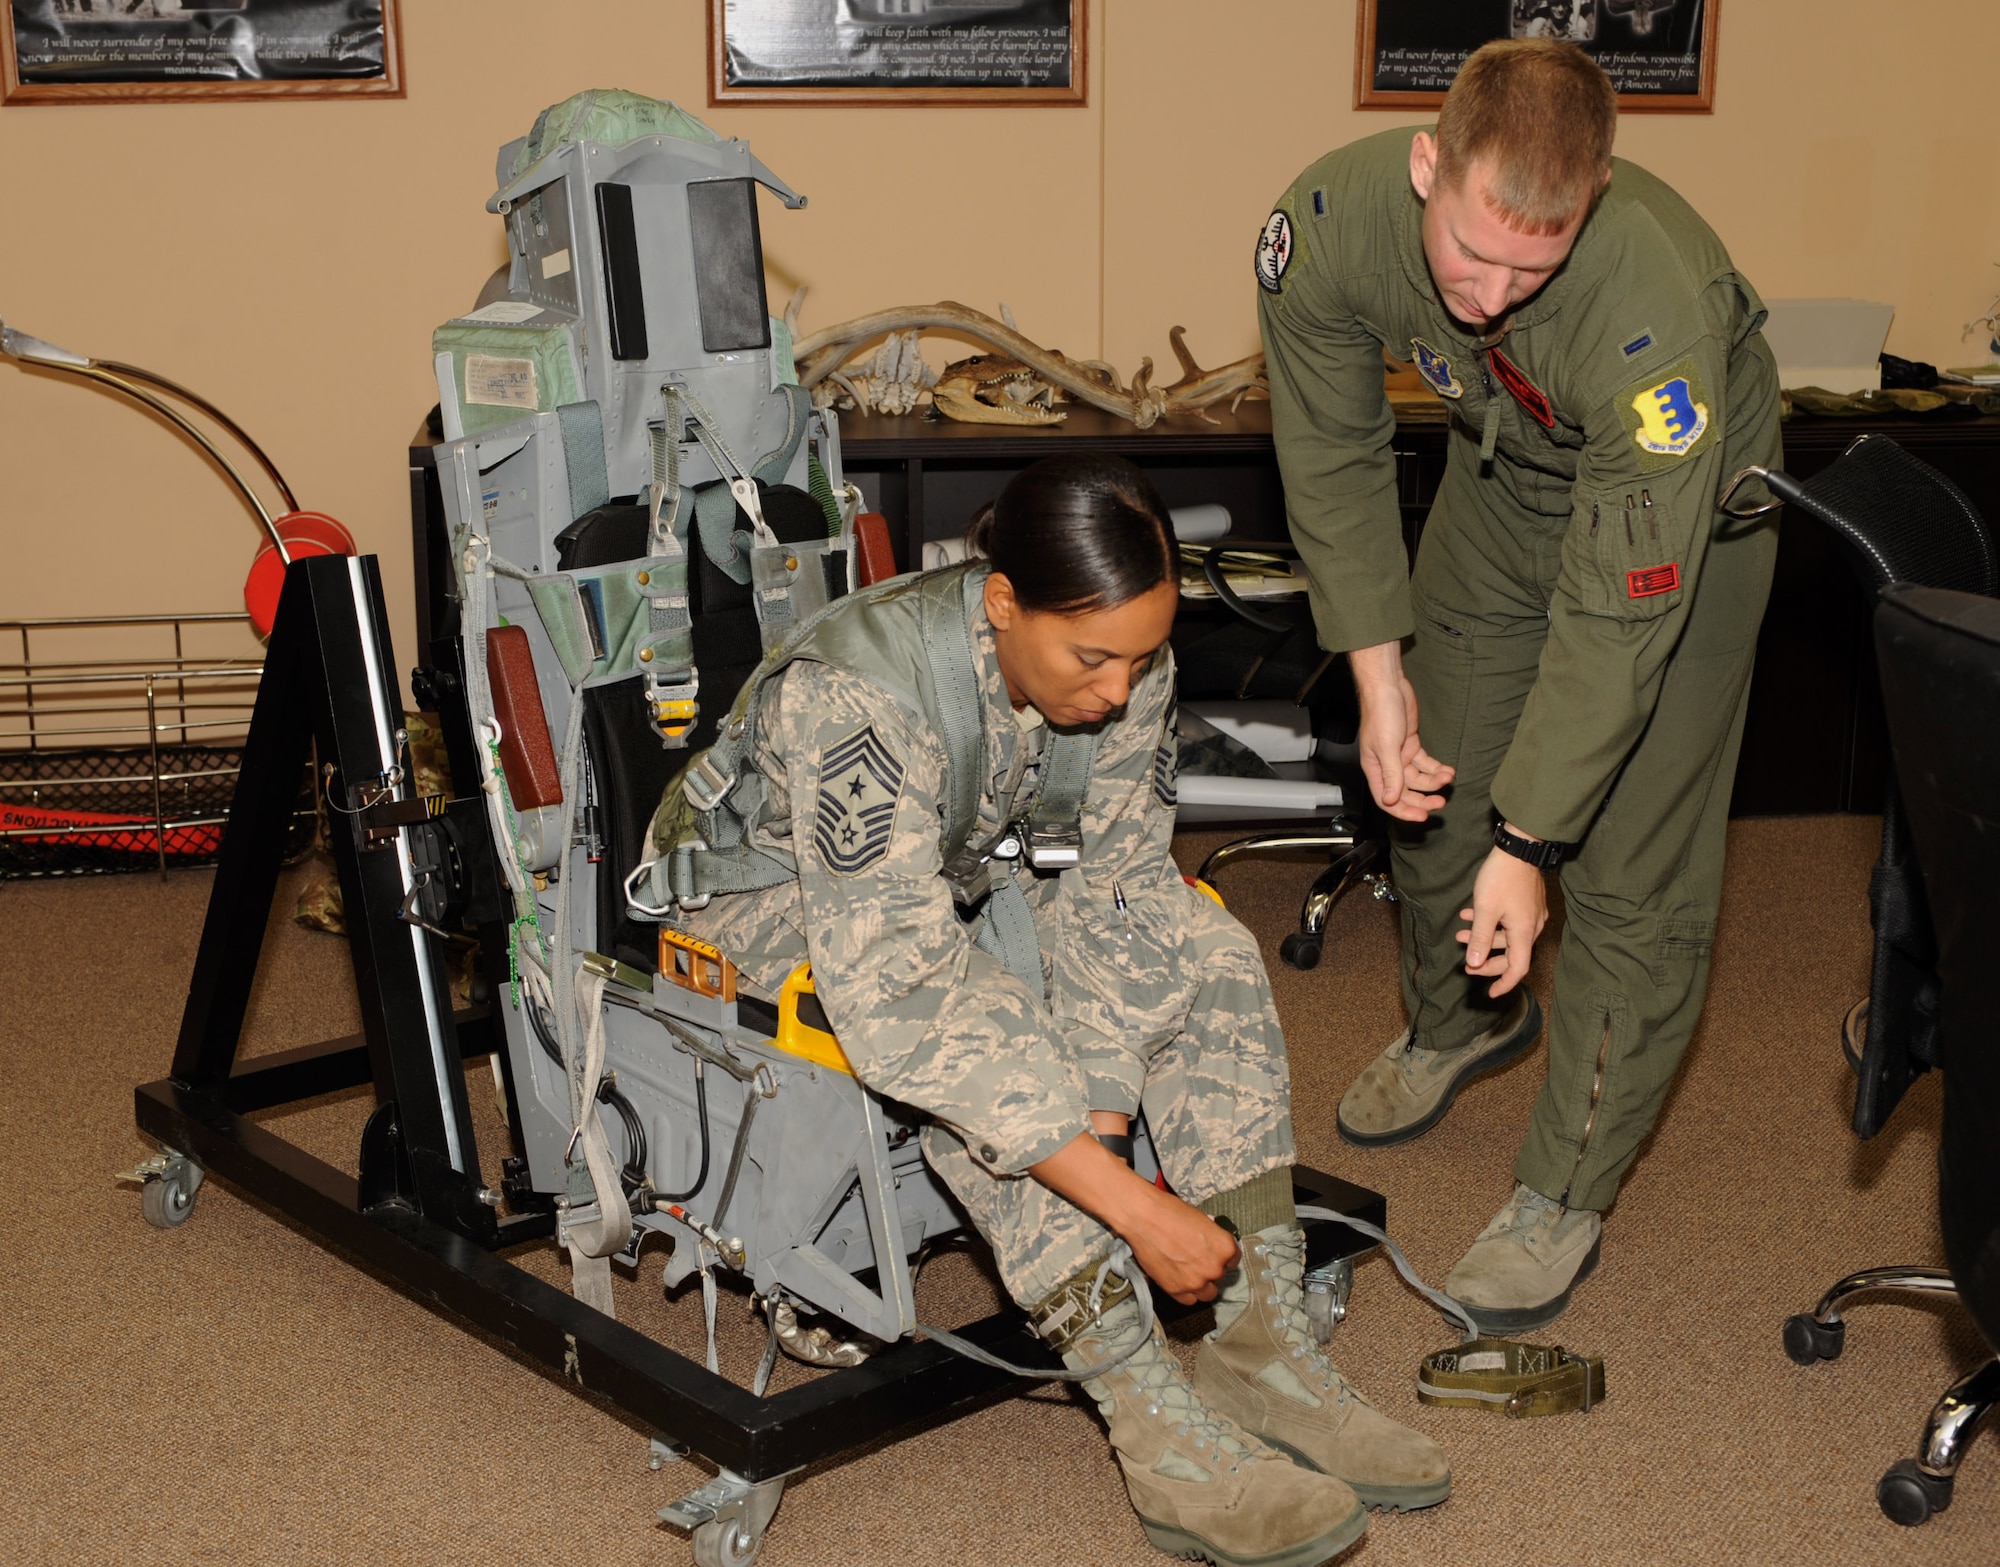 Chief Master Sgt. Sonia Lee, the command chief of the 28th Bomb Wing, straps into a B-1 bomber training seat as part of pre-flight training with 1st Lt. Matthew Herbstreth, 34th Bomb Squadron pilot, at Ellsworth Air Force Base, S.D., July 13, 2016. During the training, Lee learned about aircraft safety procedures, how to properly wear the equipment and participated in parachute training. (U.S. Air Force photo by Airman 1st Class Denise M. Nevins)